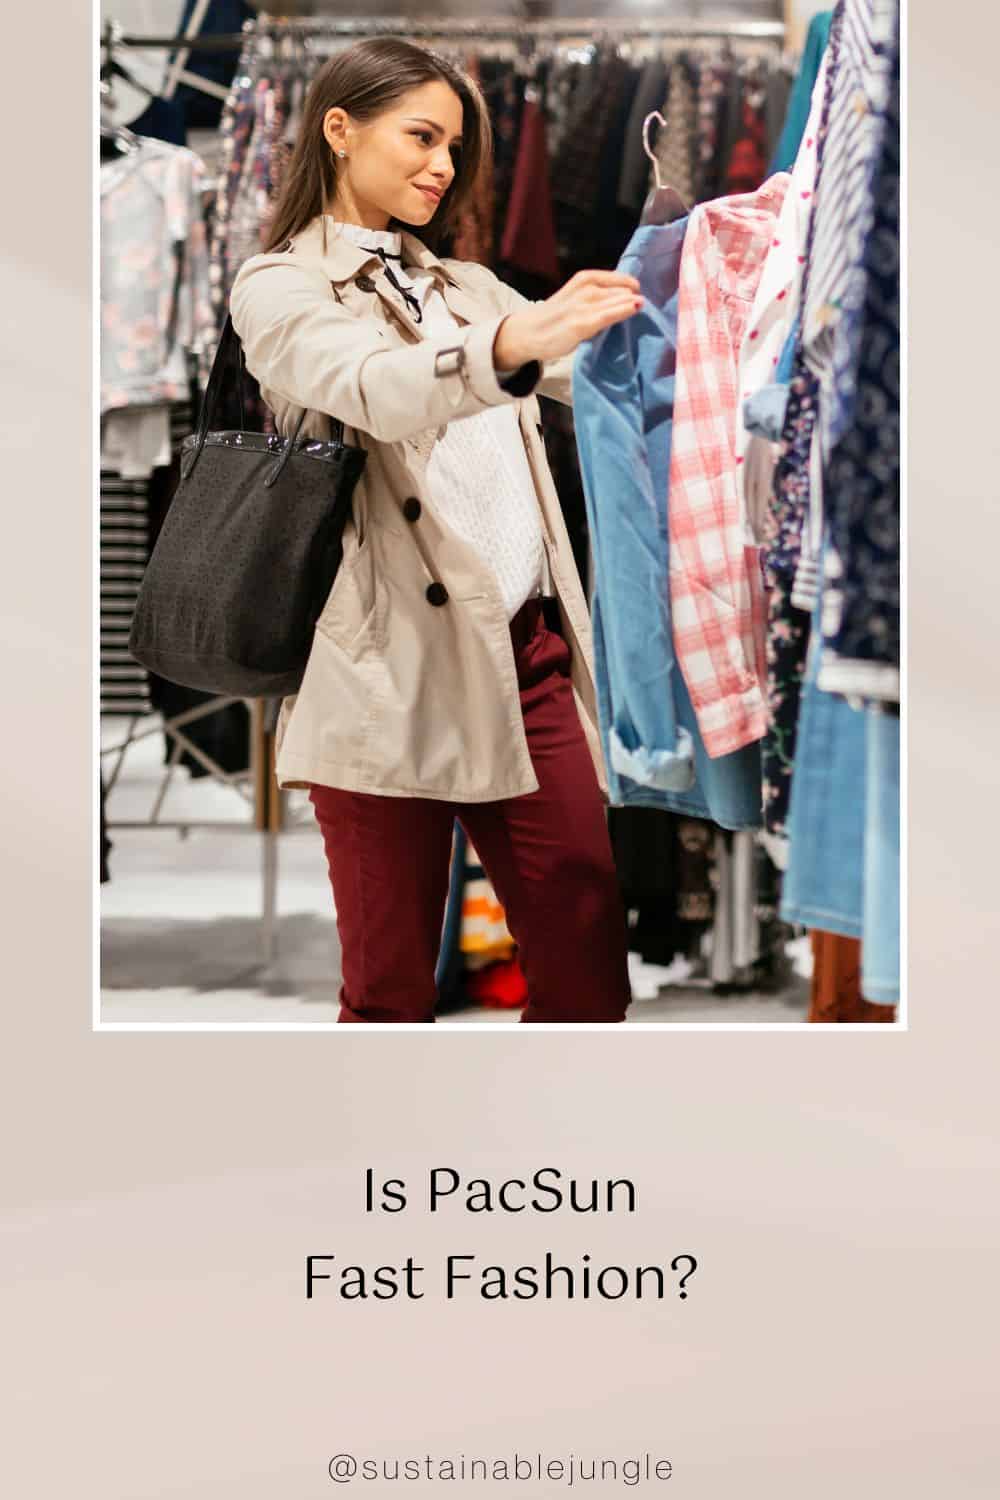 Is PacSun Fast Fashion? Image by nd3000 #ispacsunfastfashion #ispacsunethical #pacsunsustainability #ispacsunlegit #pacsunethics #ispacsunsustainable #sustainablejungle